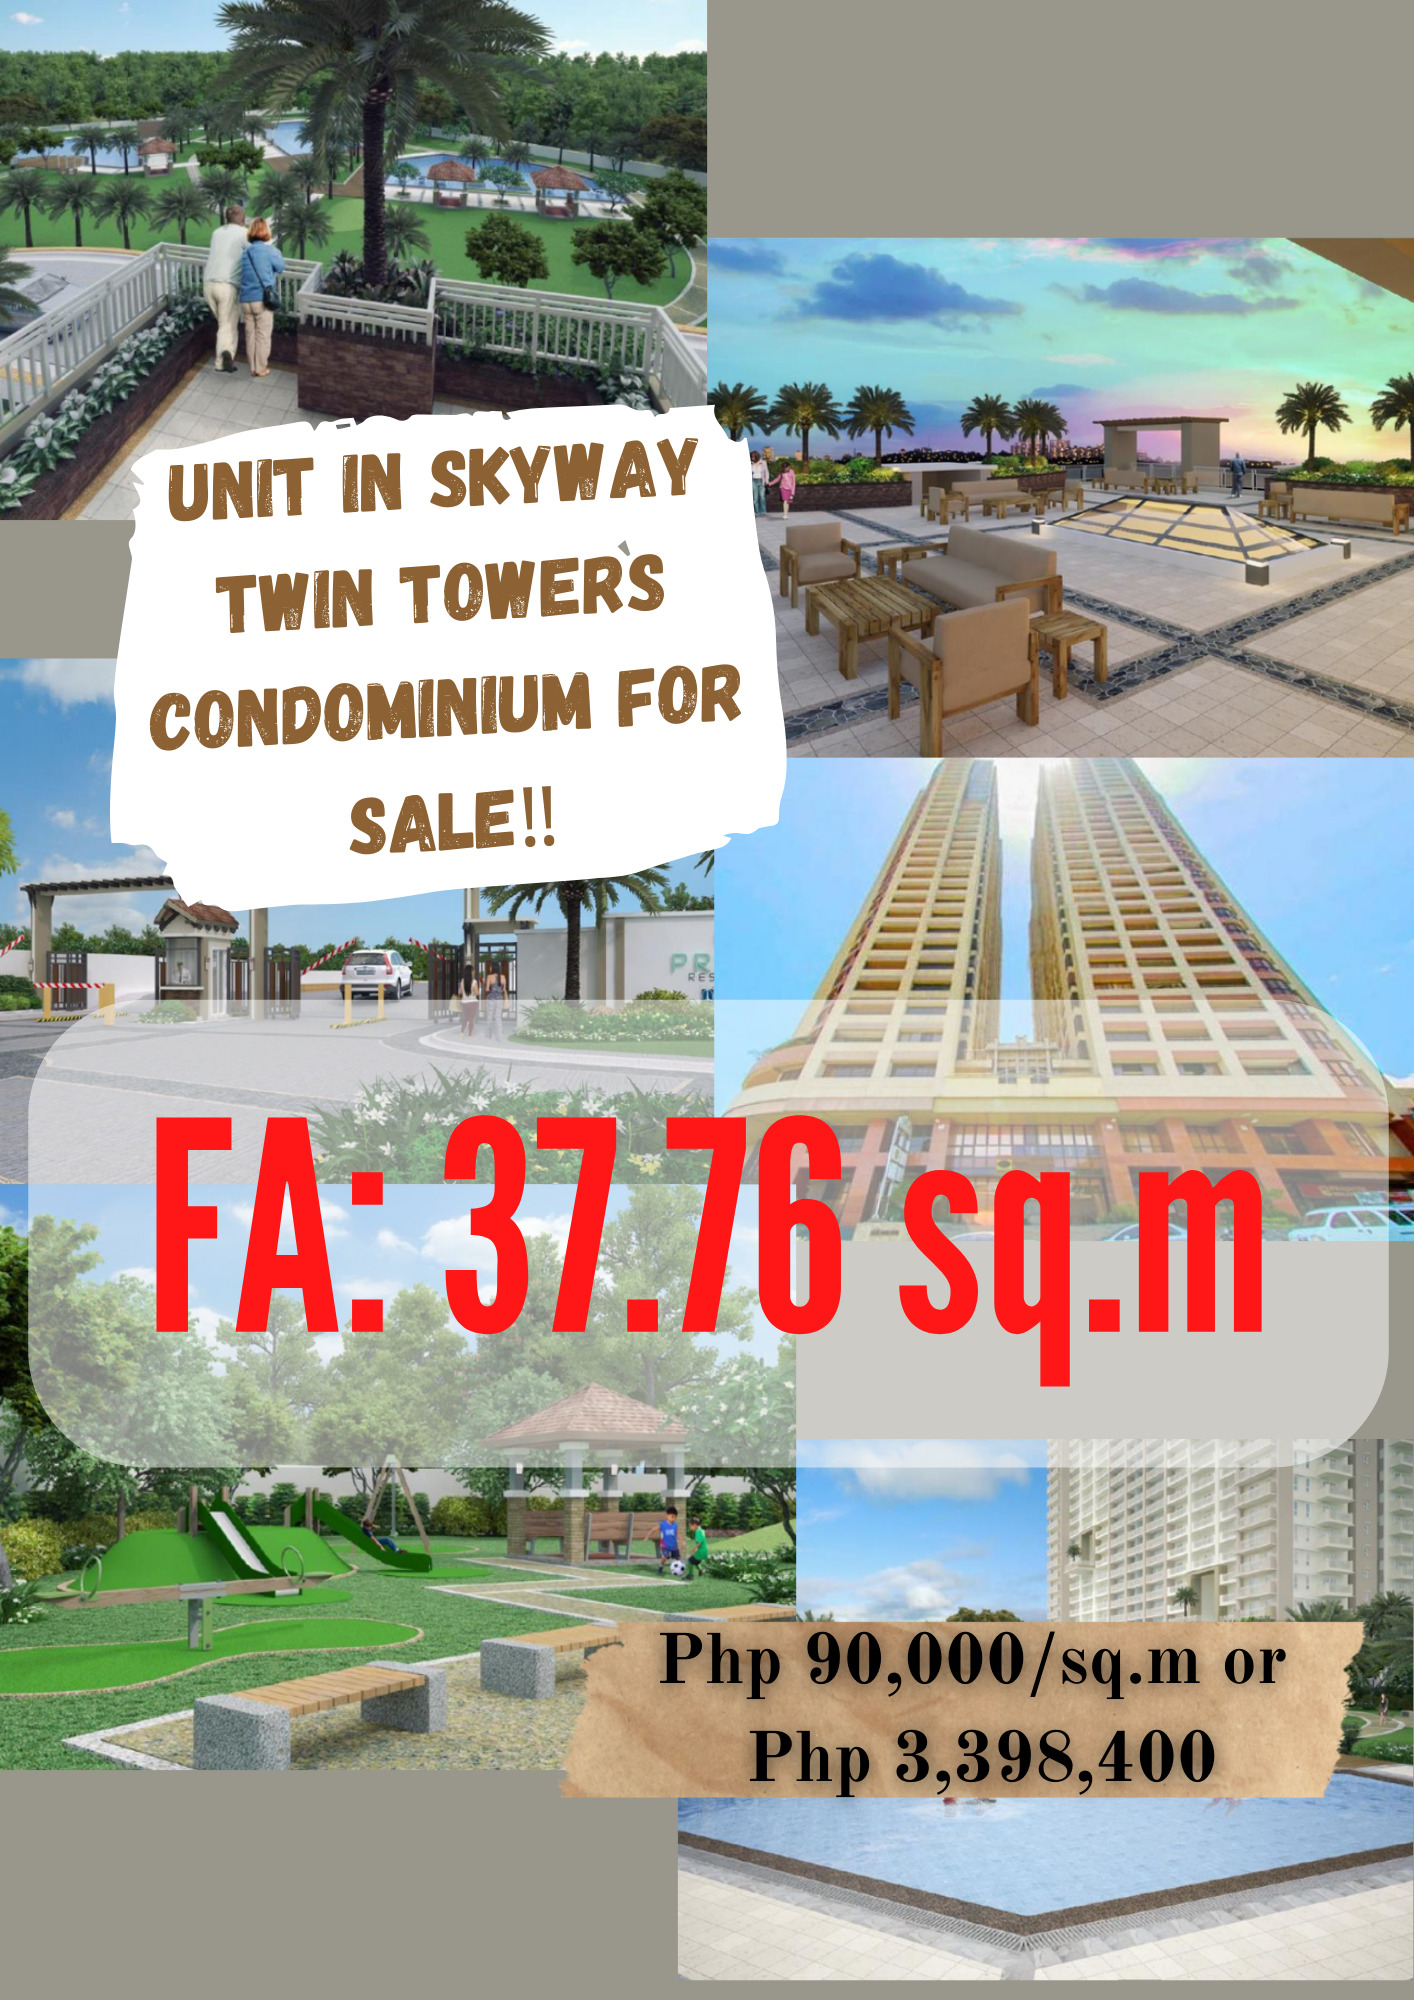 Unit in Skyway Twin Towers Condominium FOR SALE‼️